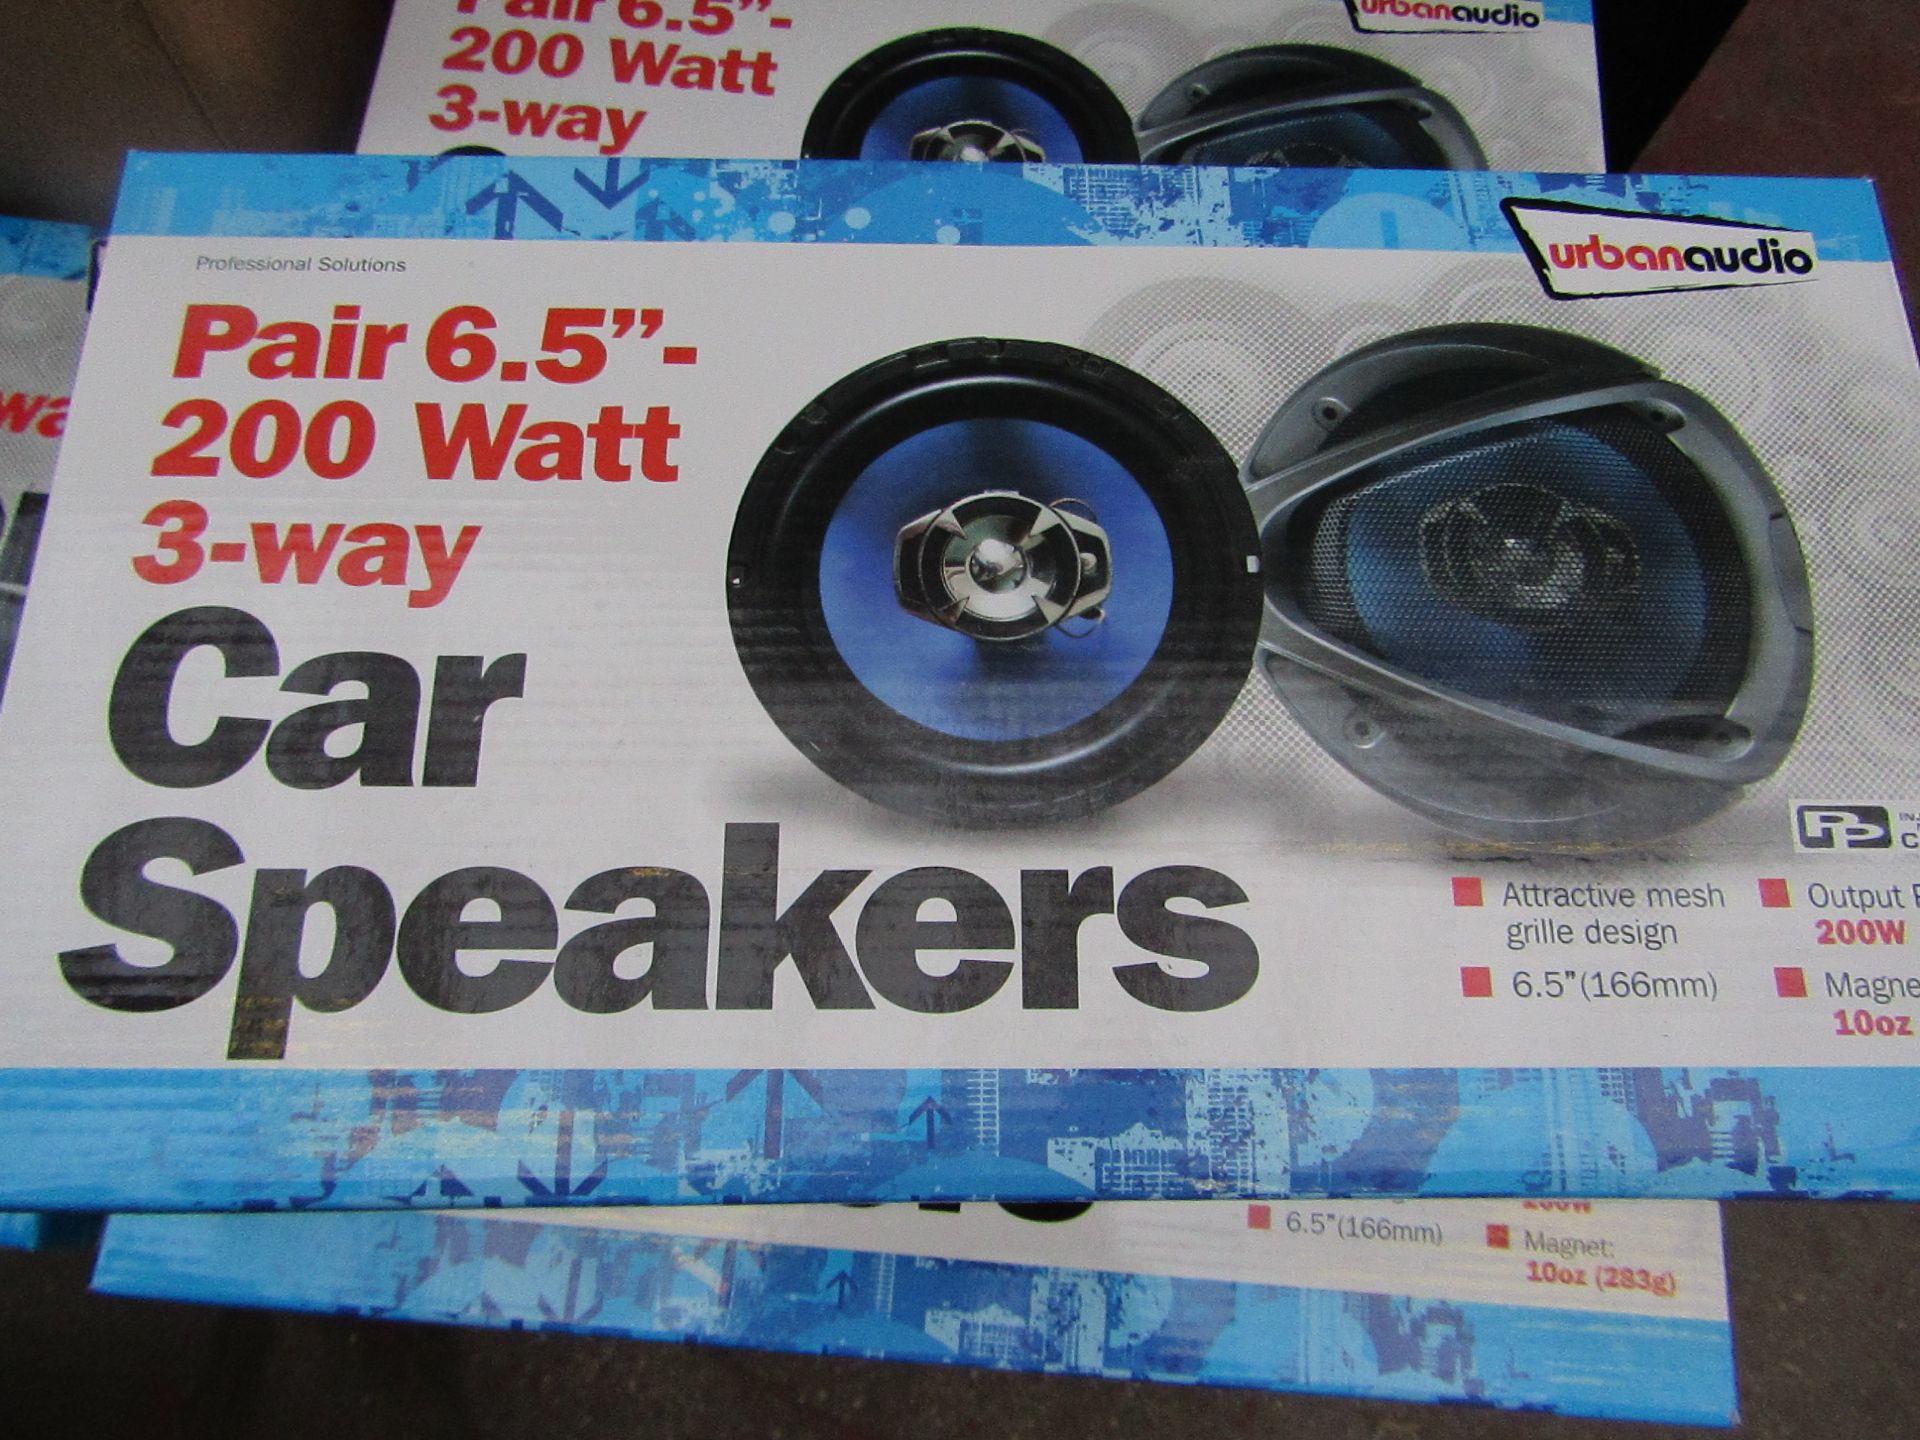 Streetwize Audio - Pair 6.5" 200w 3-Way Car Speakers - Unchecked & Boxed.